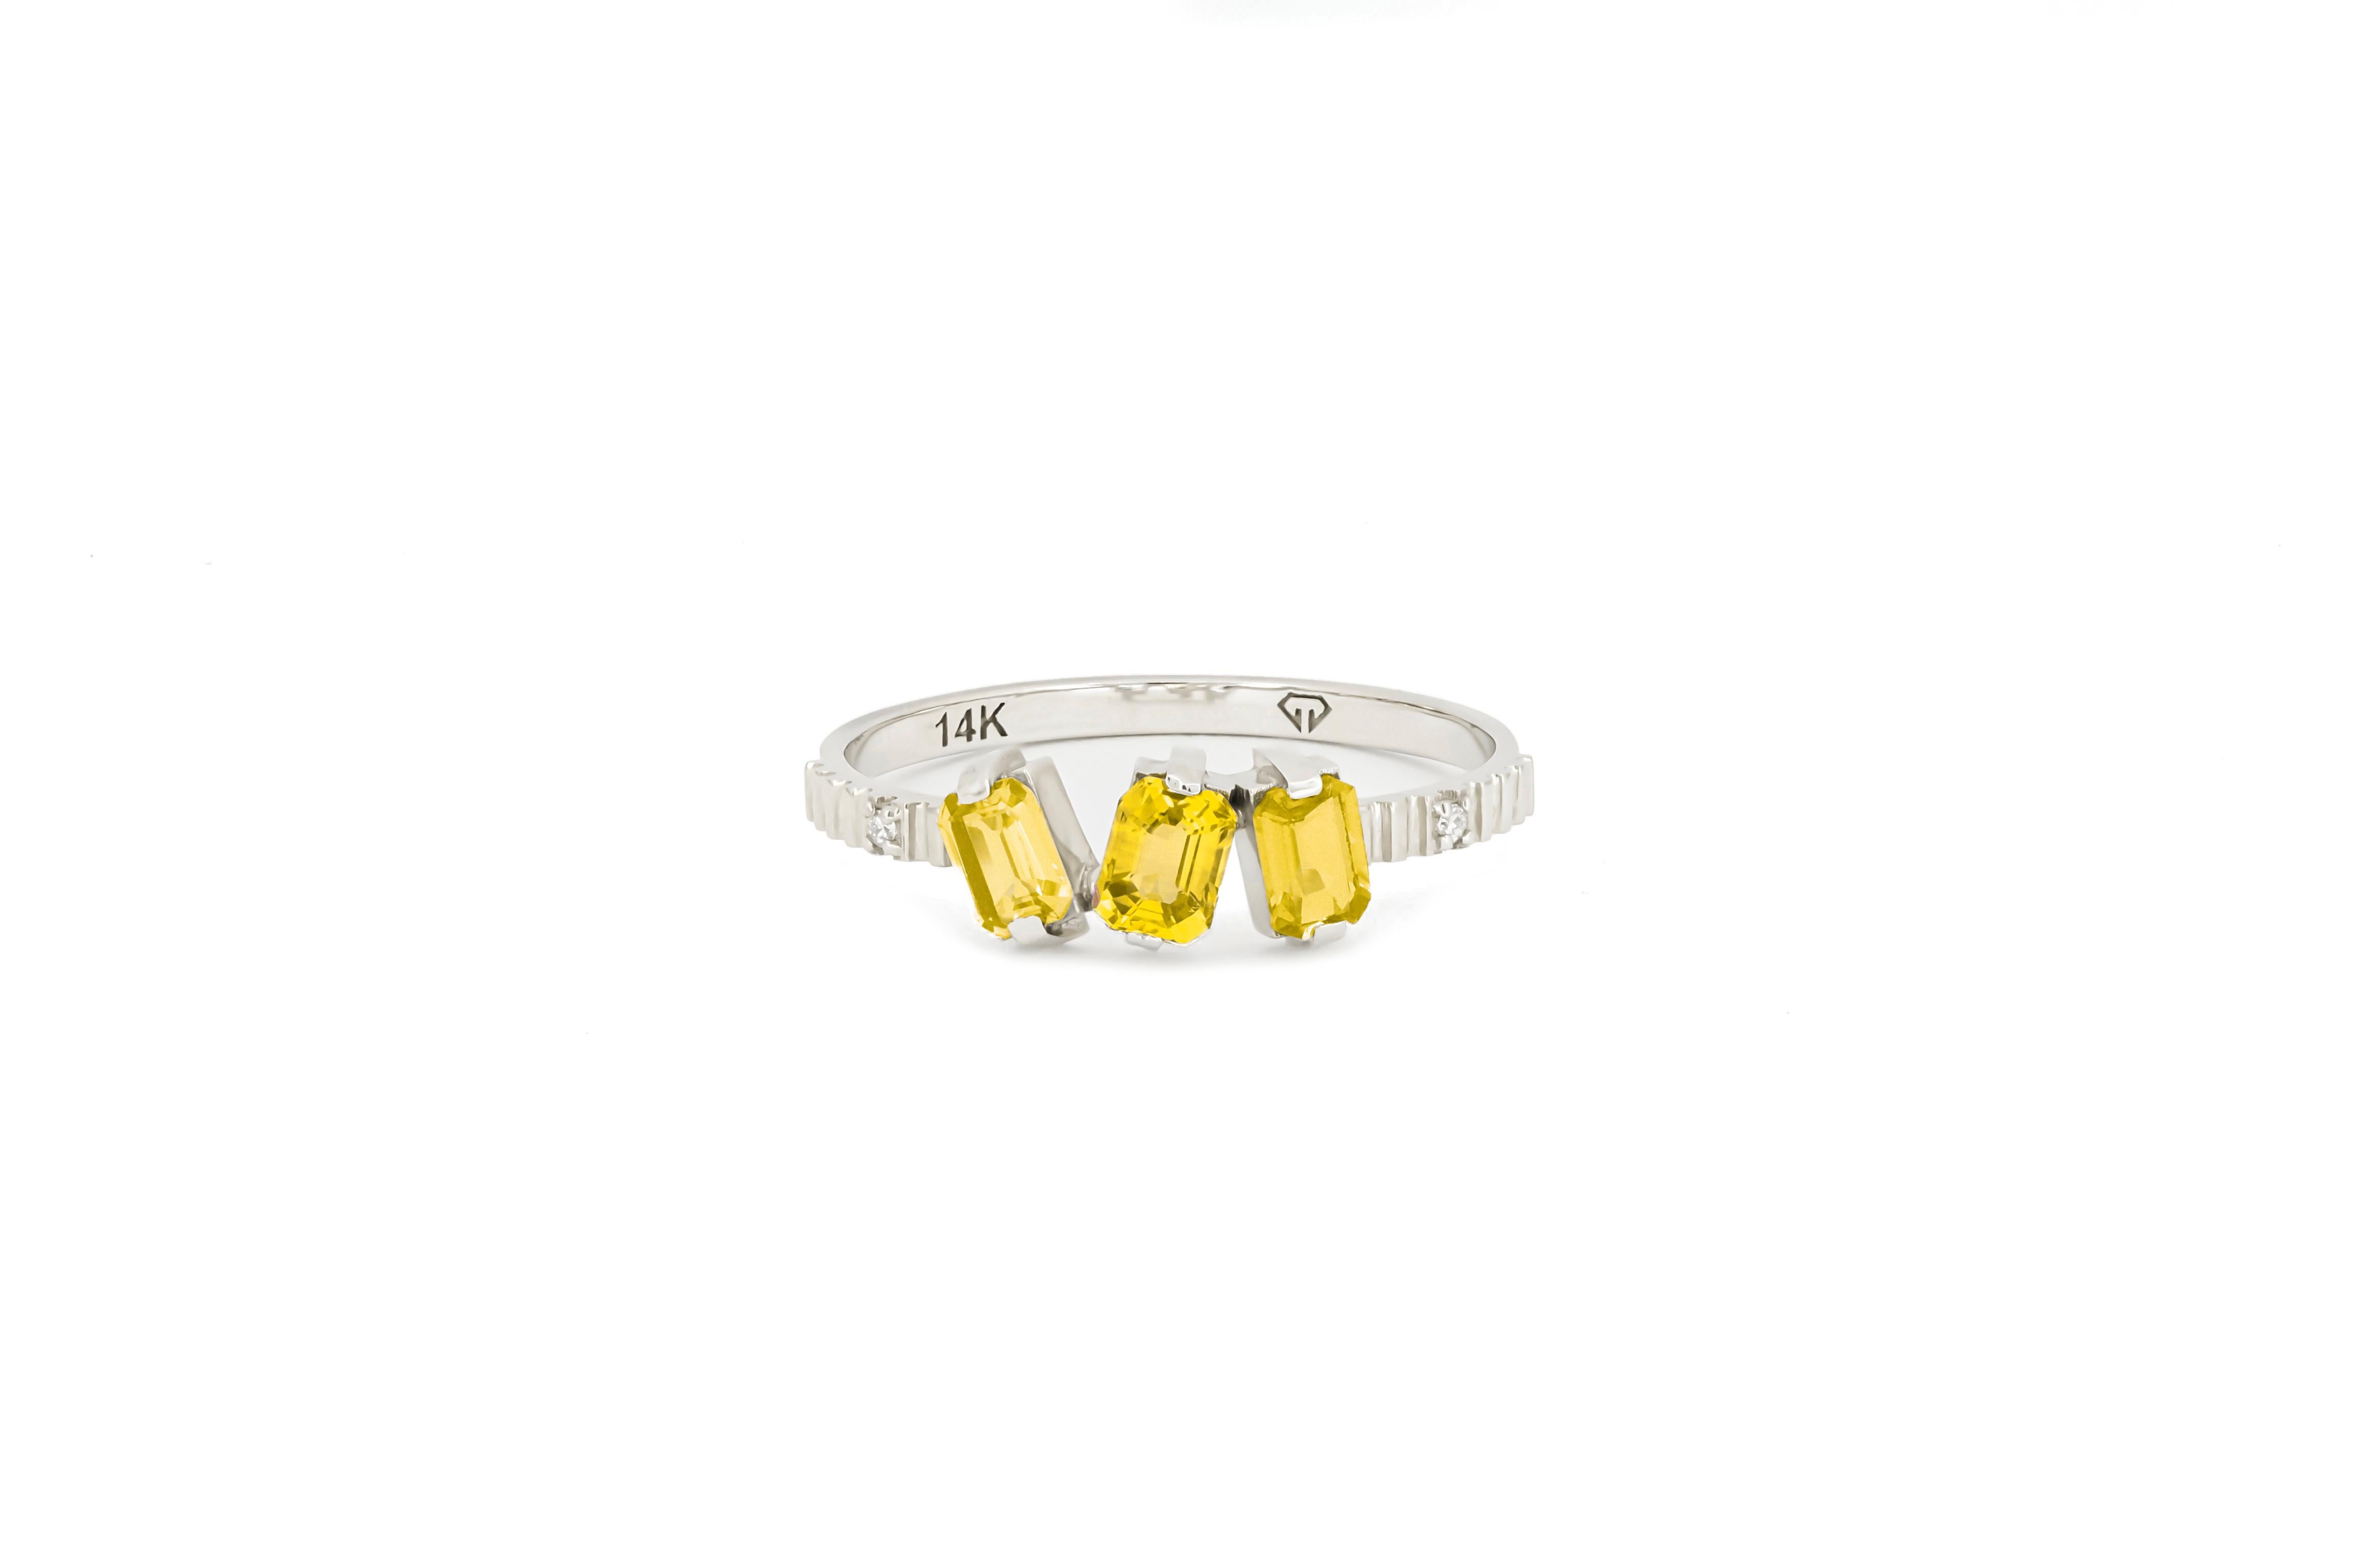 Monochrome yellow gemstone 14k ring. Yellow gemstone engagement 14k gold ring. Baguette lab sapphire gold ring. Delicate sapphire ring. Three gemstone ring.

Metal: 14k gold
Weight: 2 gr. depends from size

Gemstones:
3 yellow color lab sapphire ,